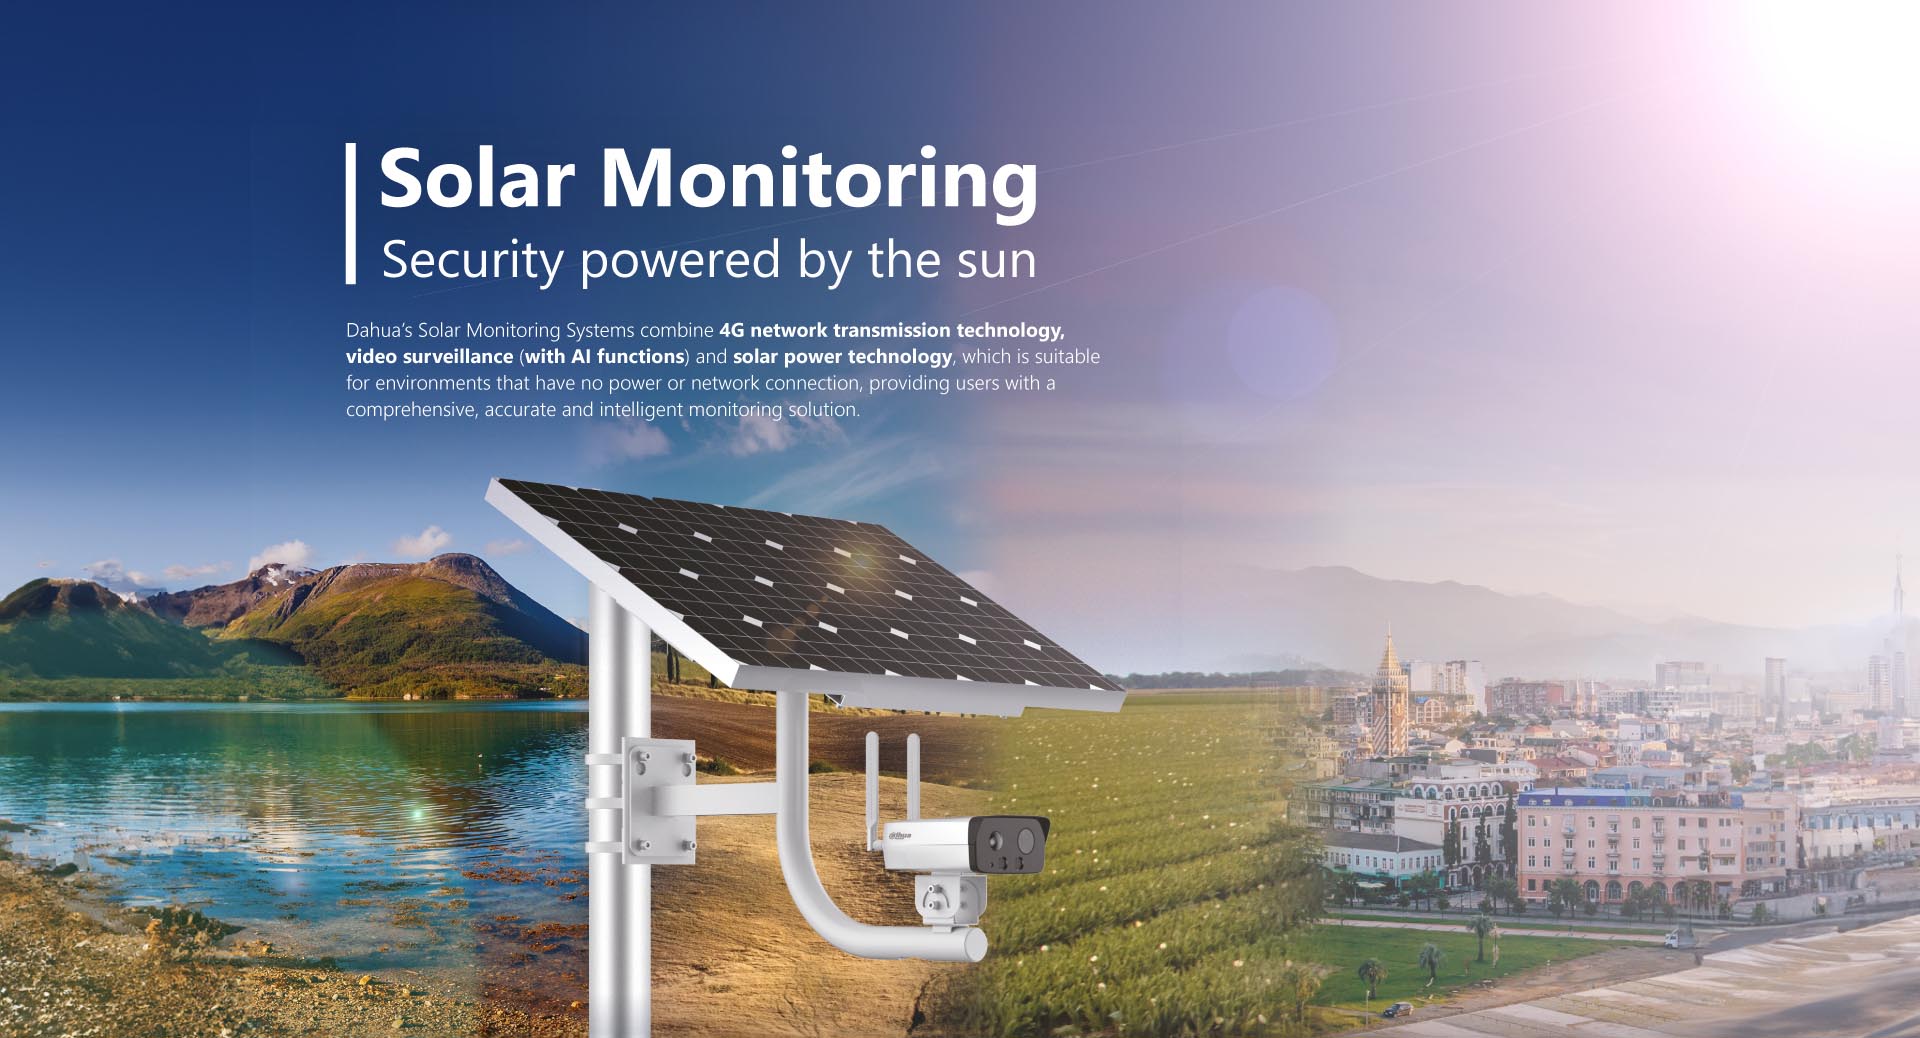 Solar Monitoring Powered by the sun